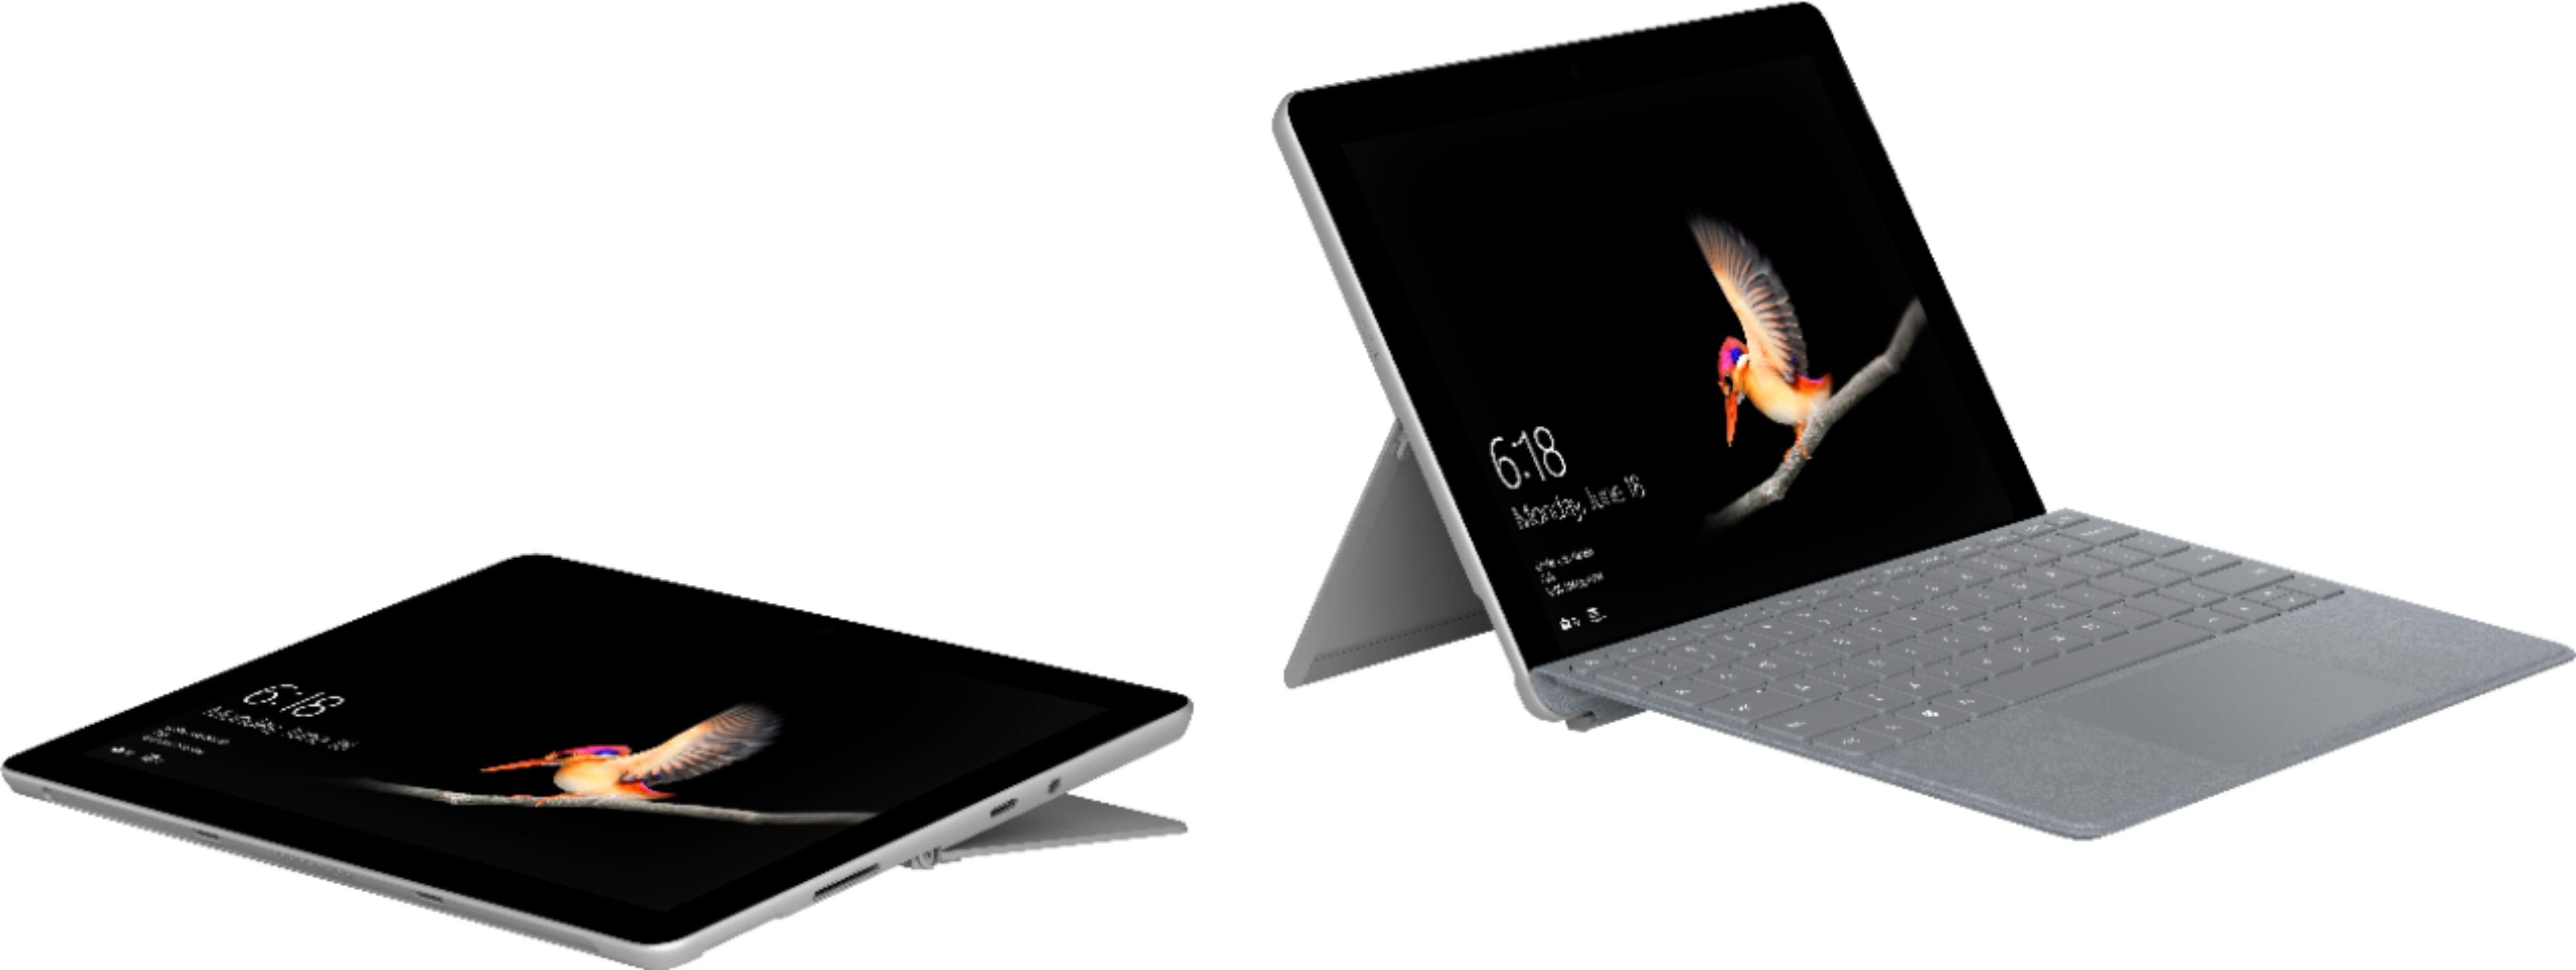 Surface Go 8GB 128GB Type Cover+256GB SD